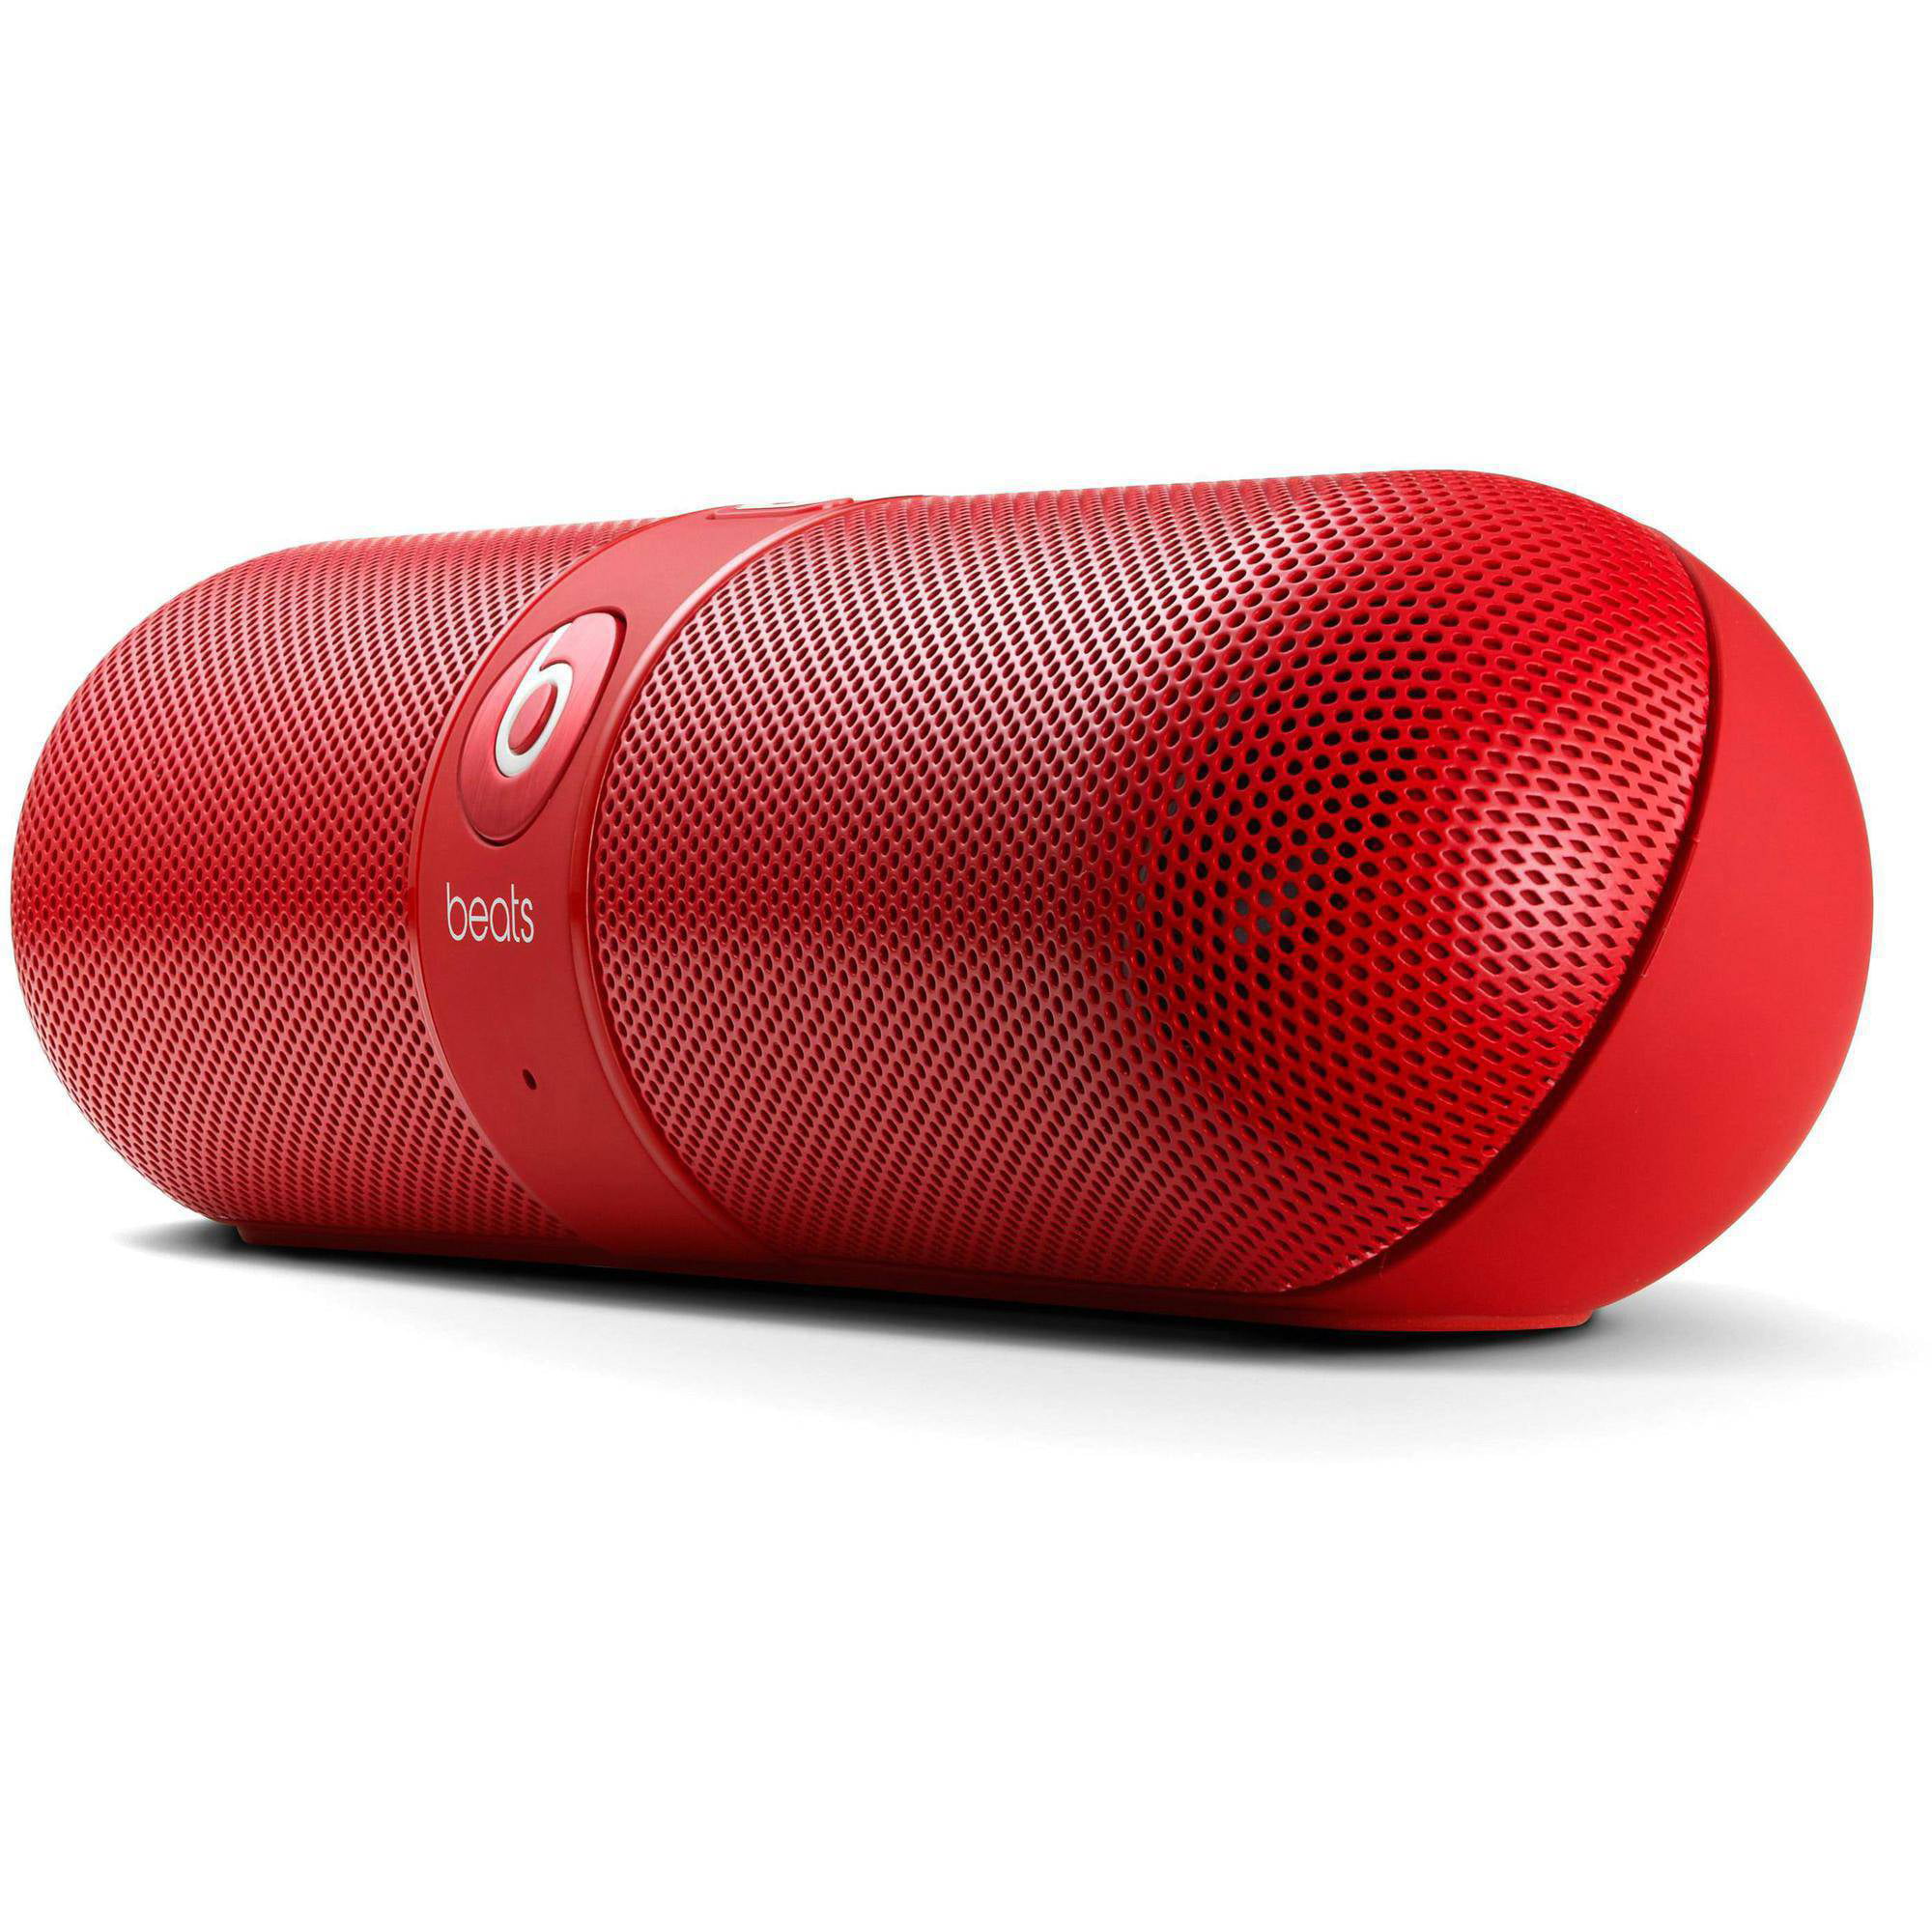 Refurbished Beats by Dr. Dre Pill 2.0 